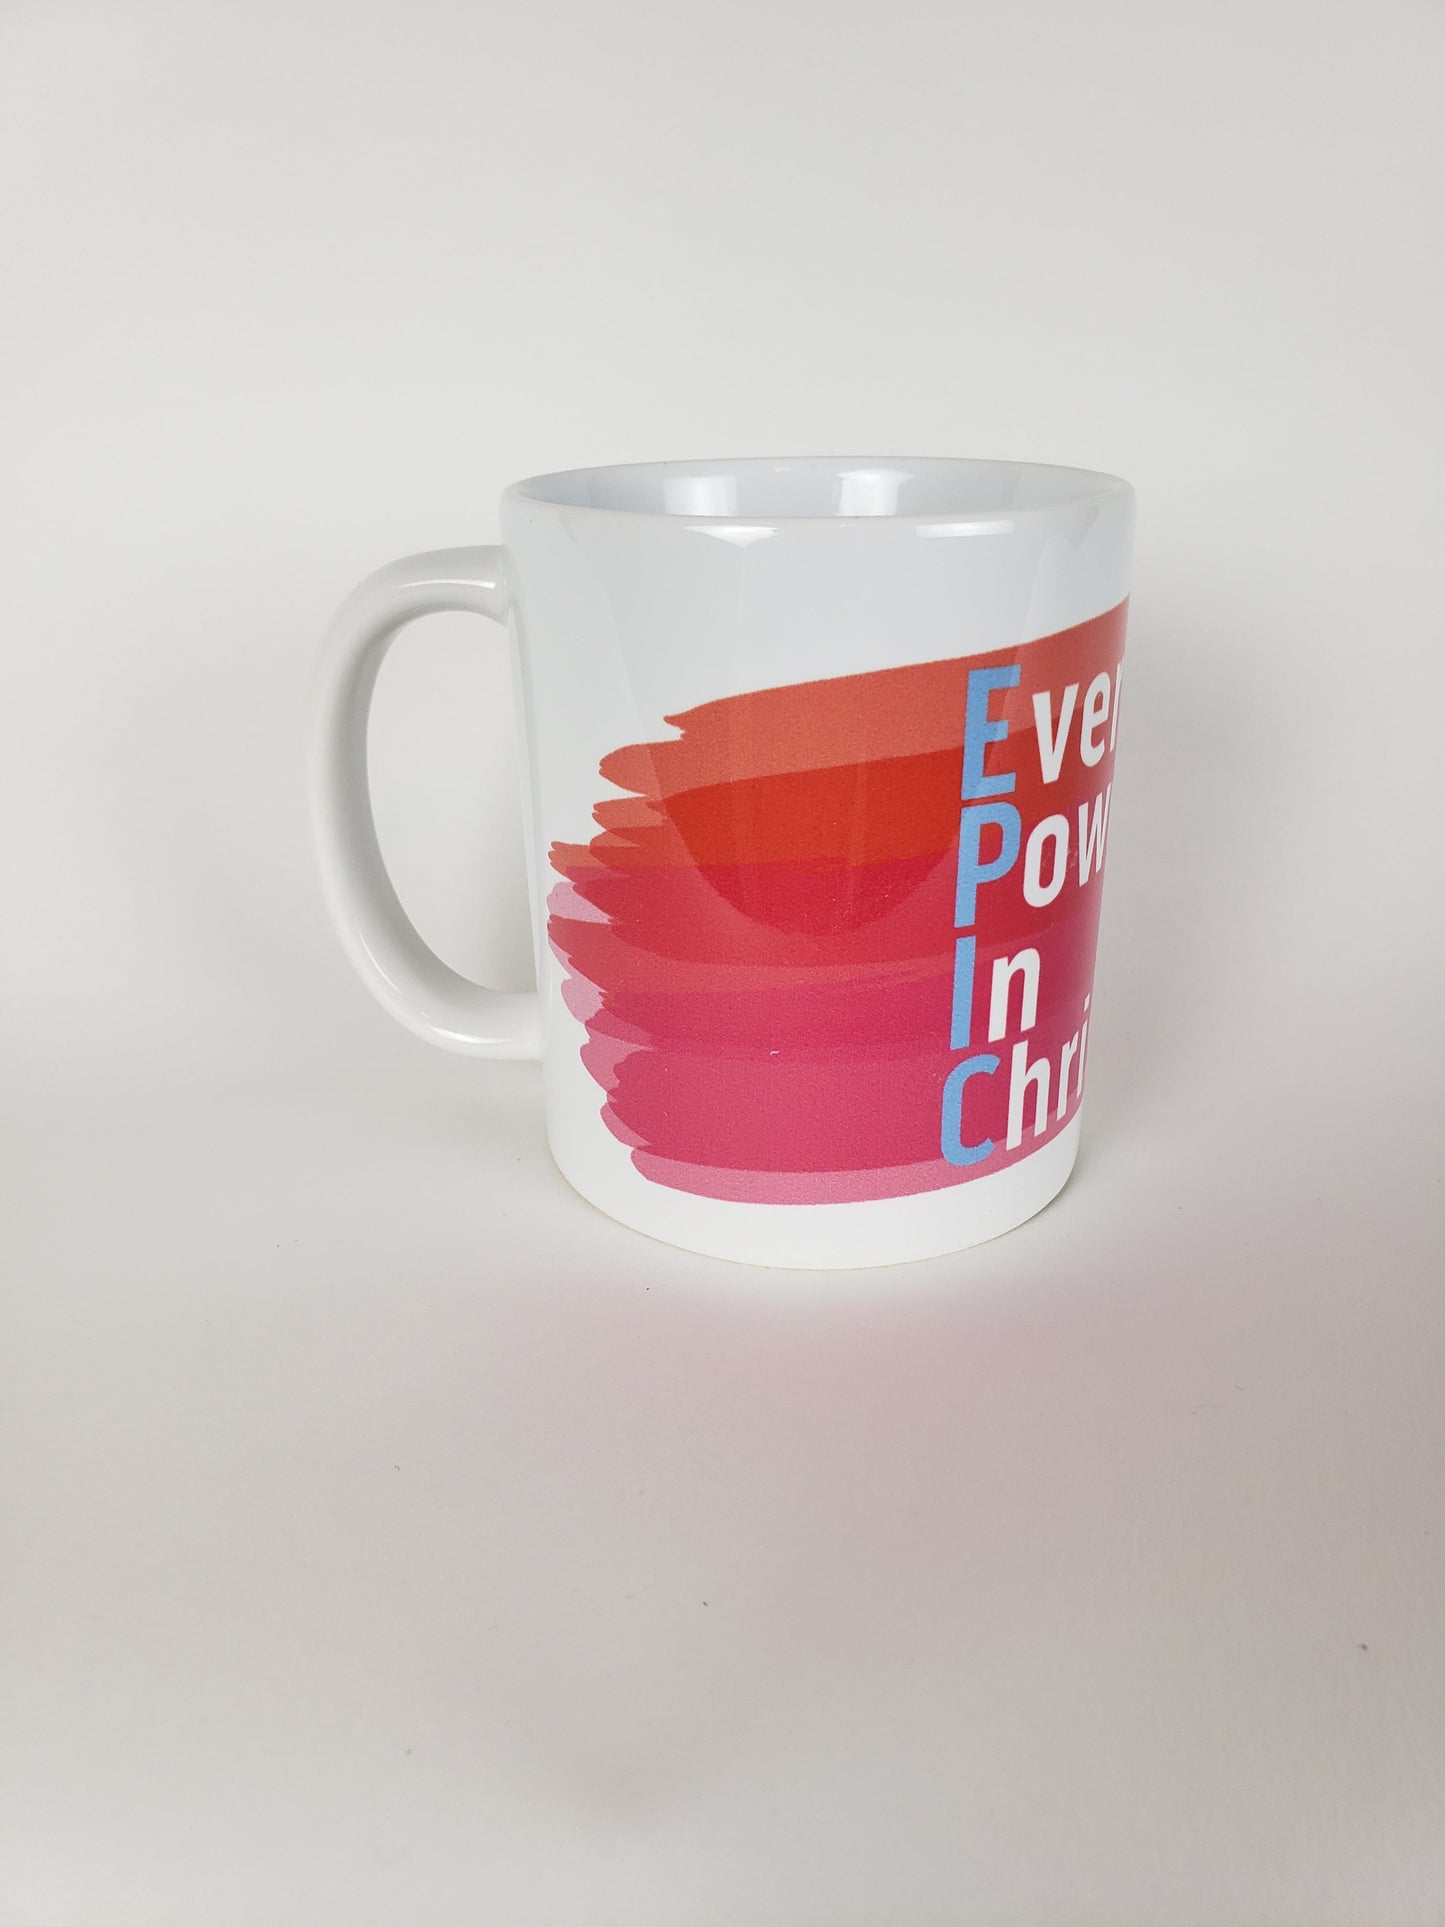 Ever Powerful In Christ Coffee Mug – Red and Blue - Madison Ghent